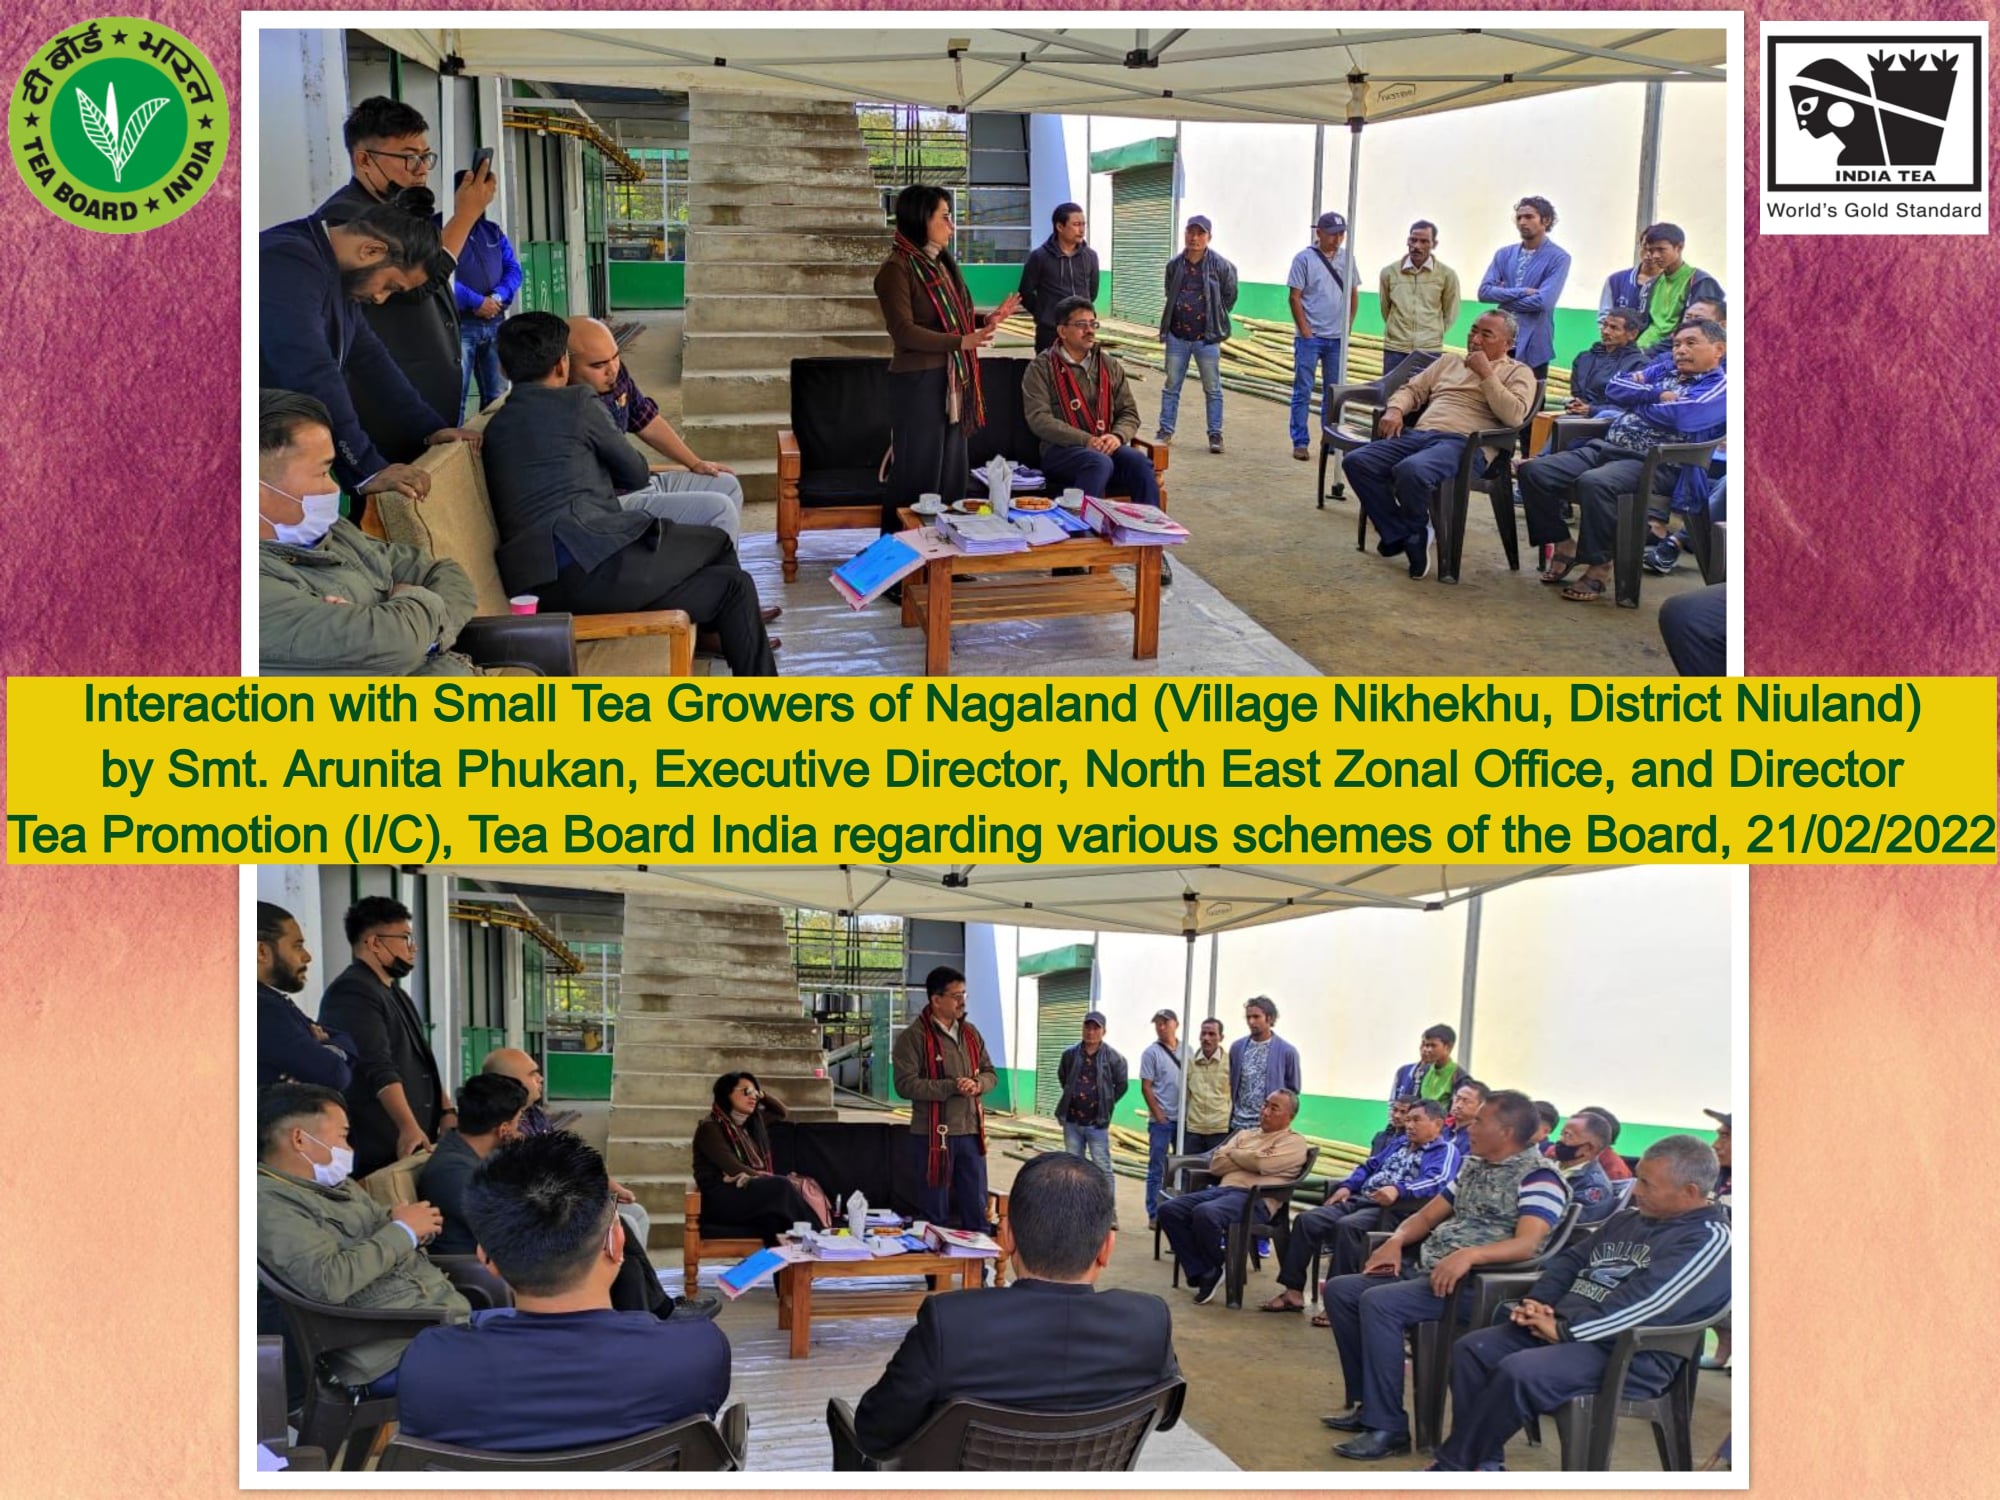 Interaction with Small Tea Growers of Nagaland (Village Nikhekhu, District Niuland) by Smt. Arunita Phukan, Executive Director, North East Zonal Office, and Director Tea Promotion (IC), 21-02-2022